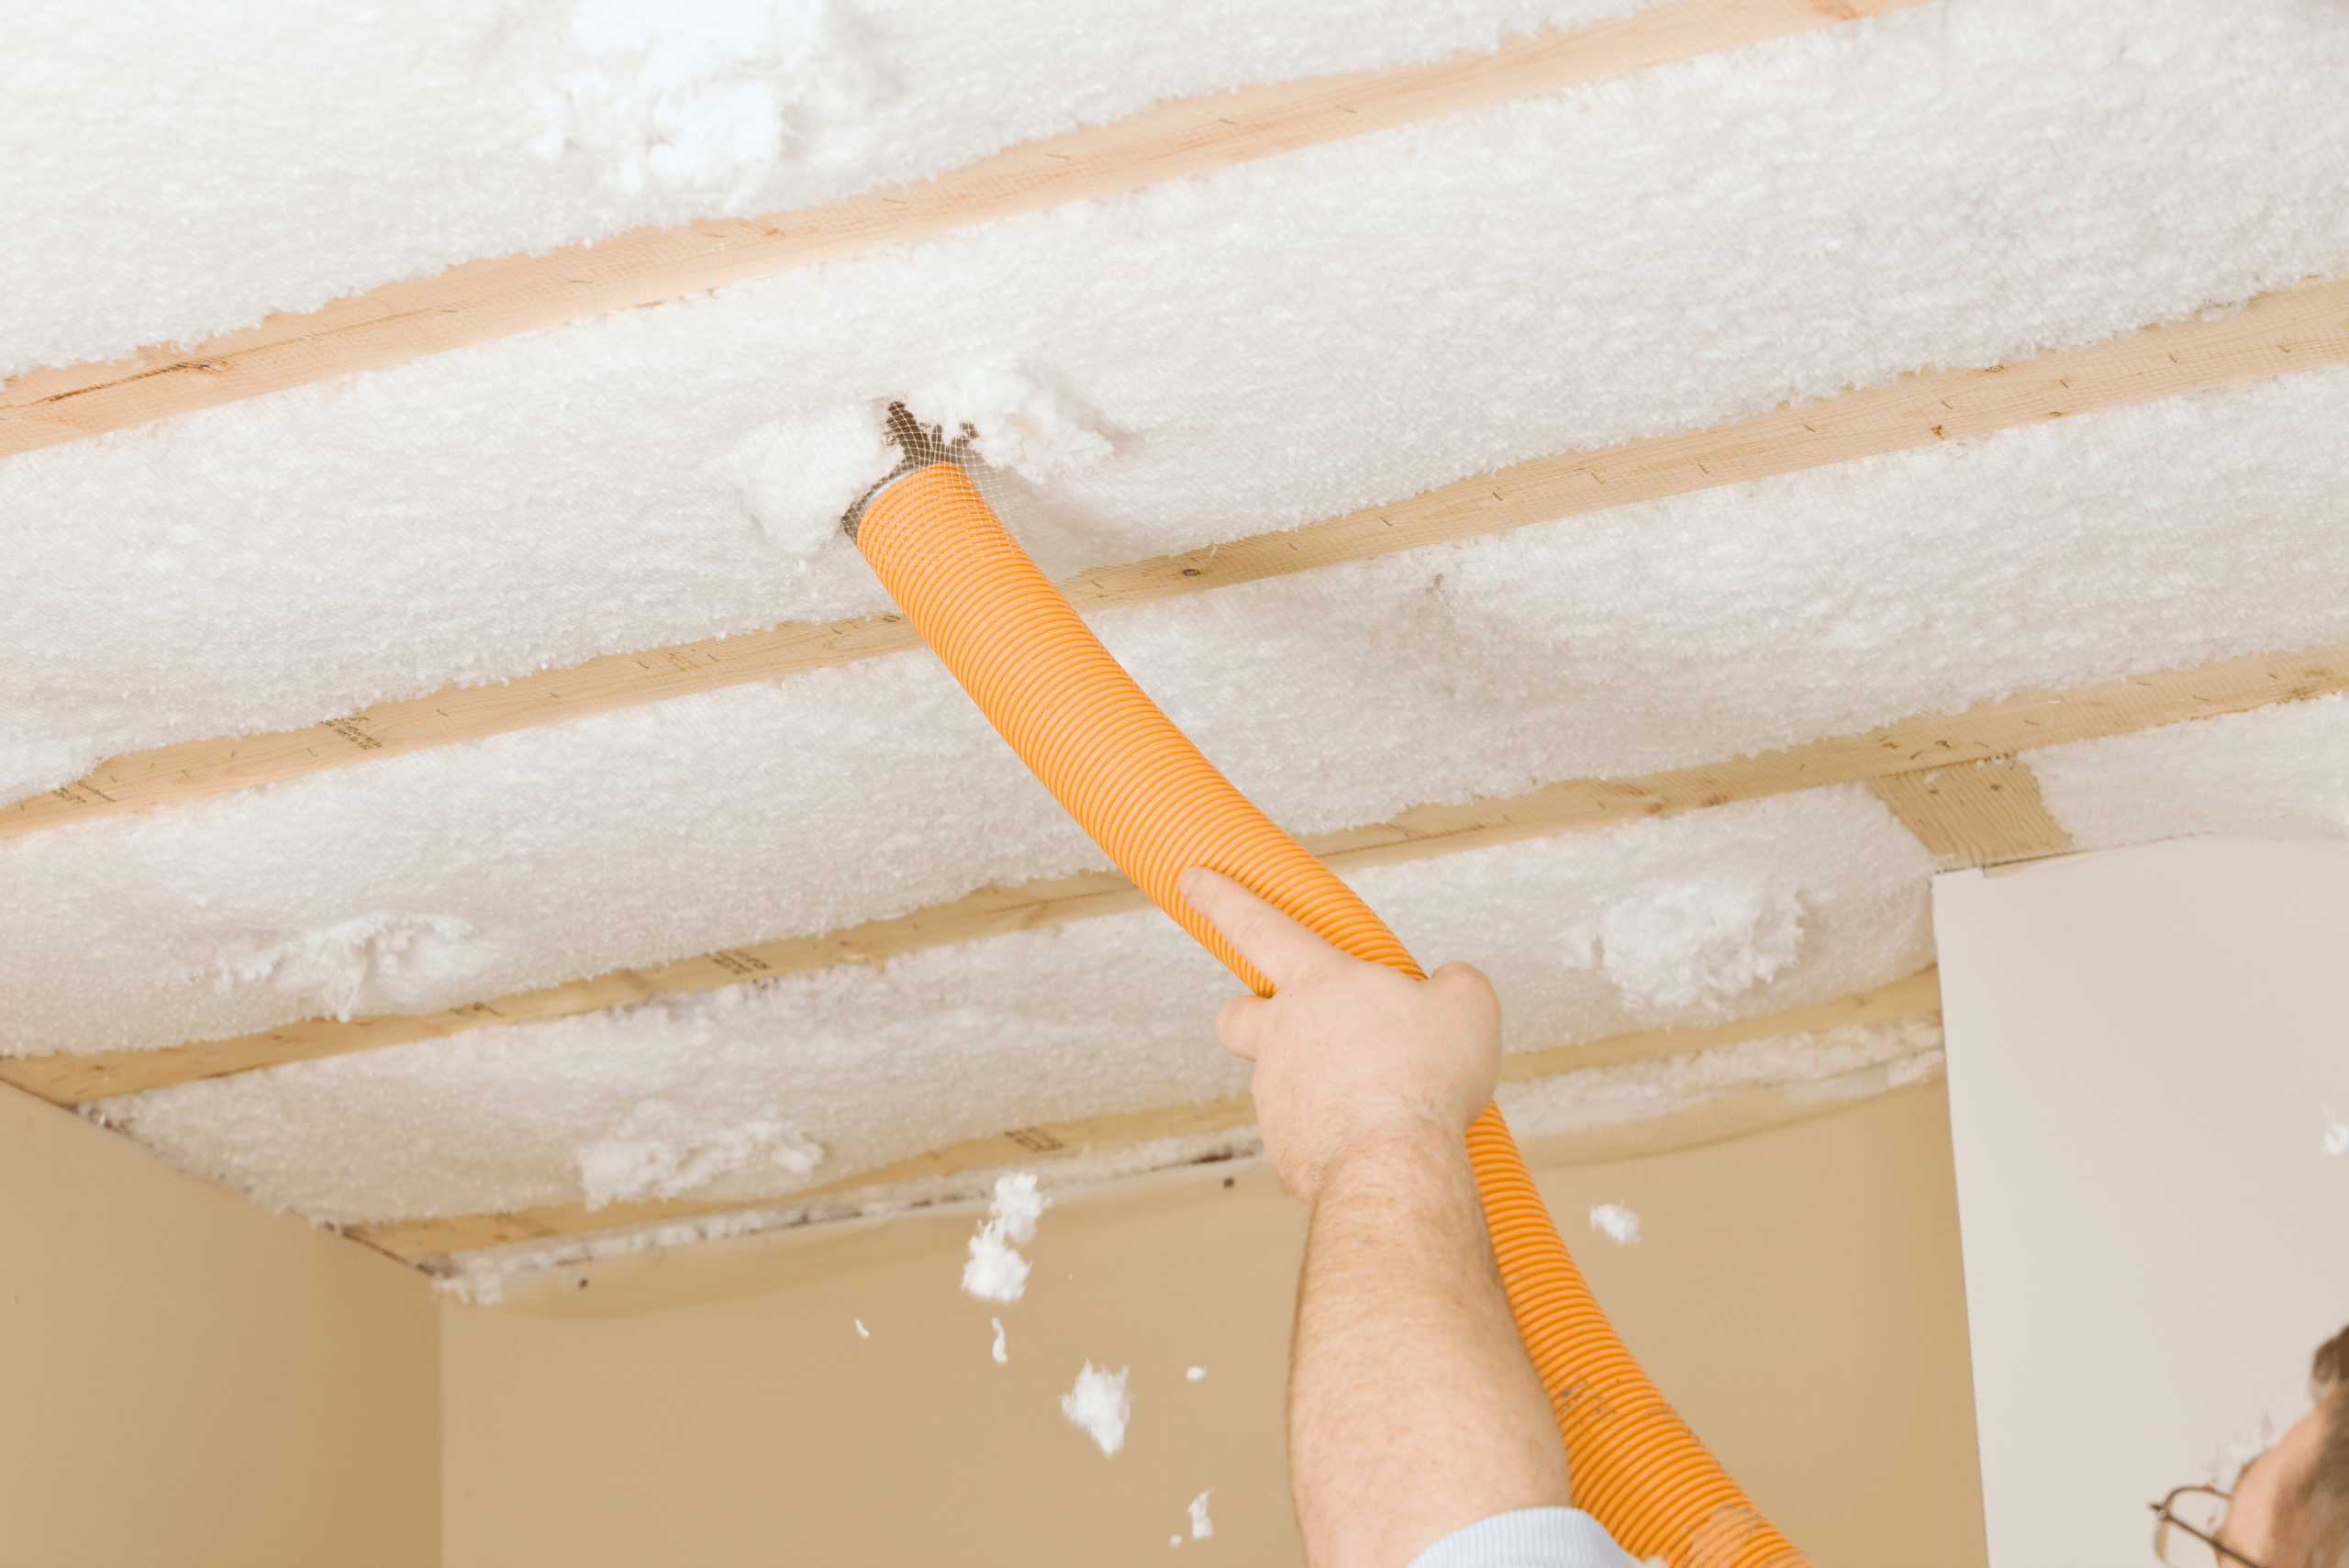 A closeup of someone's hand holding an orange tube that is pushing out insulation into the basement ceiling.